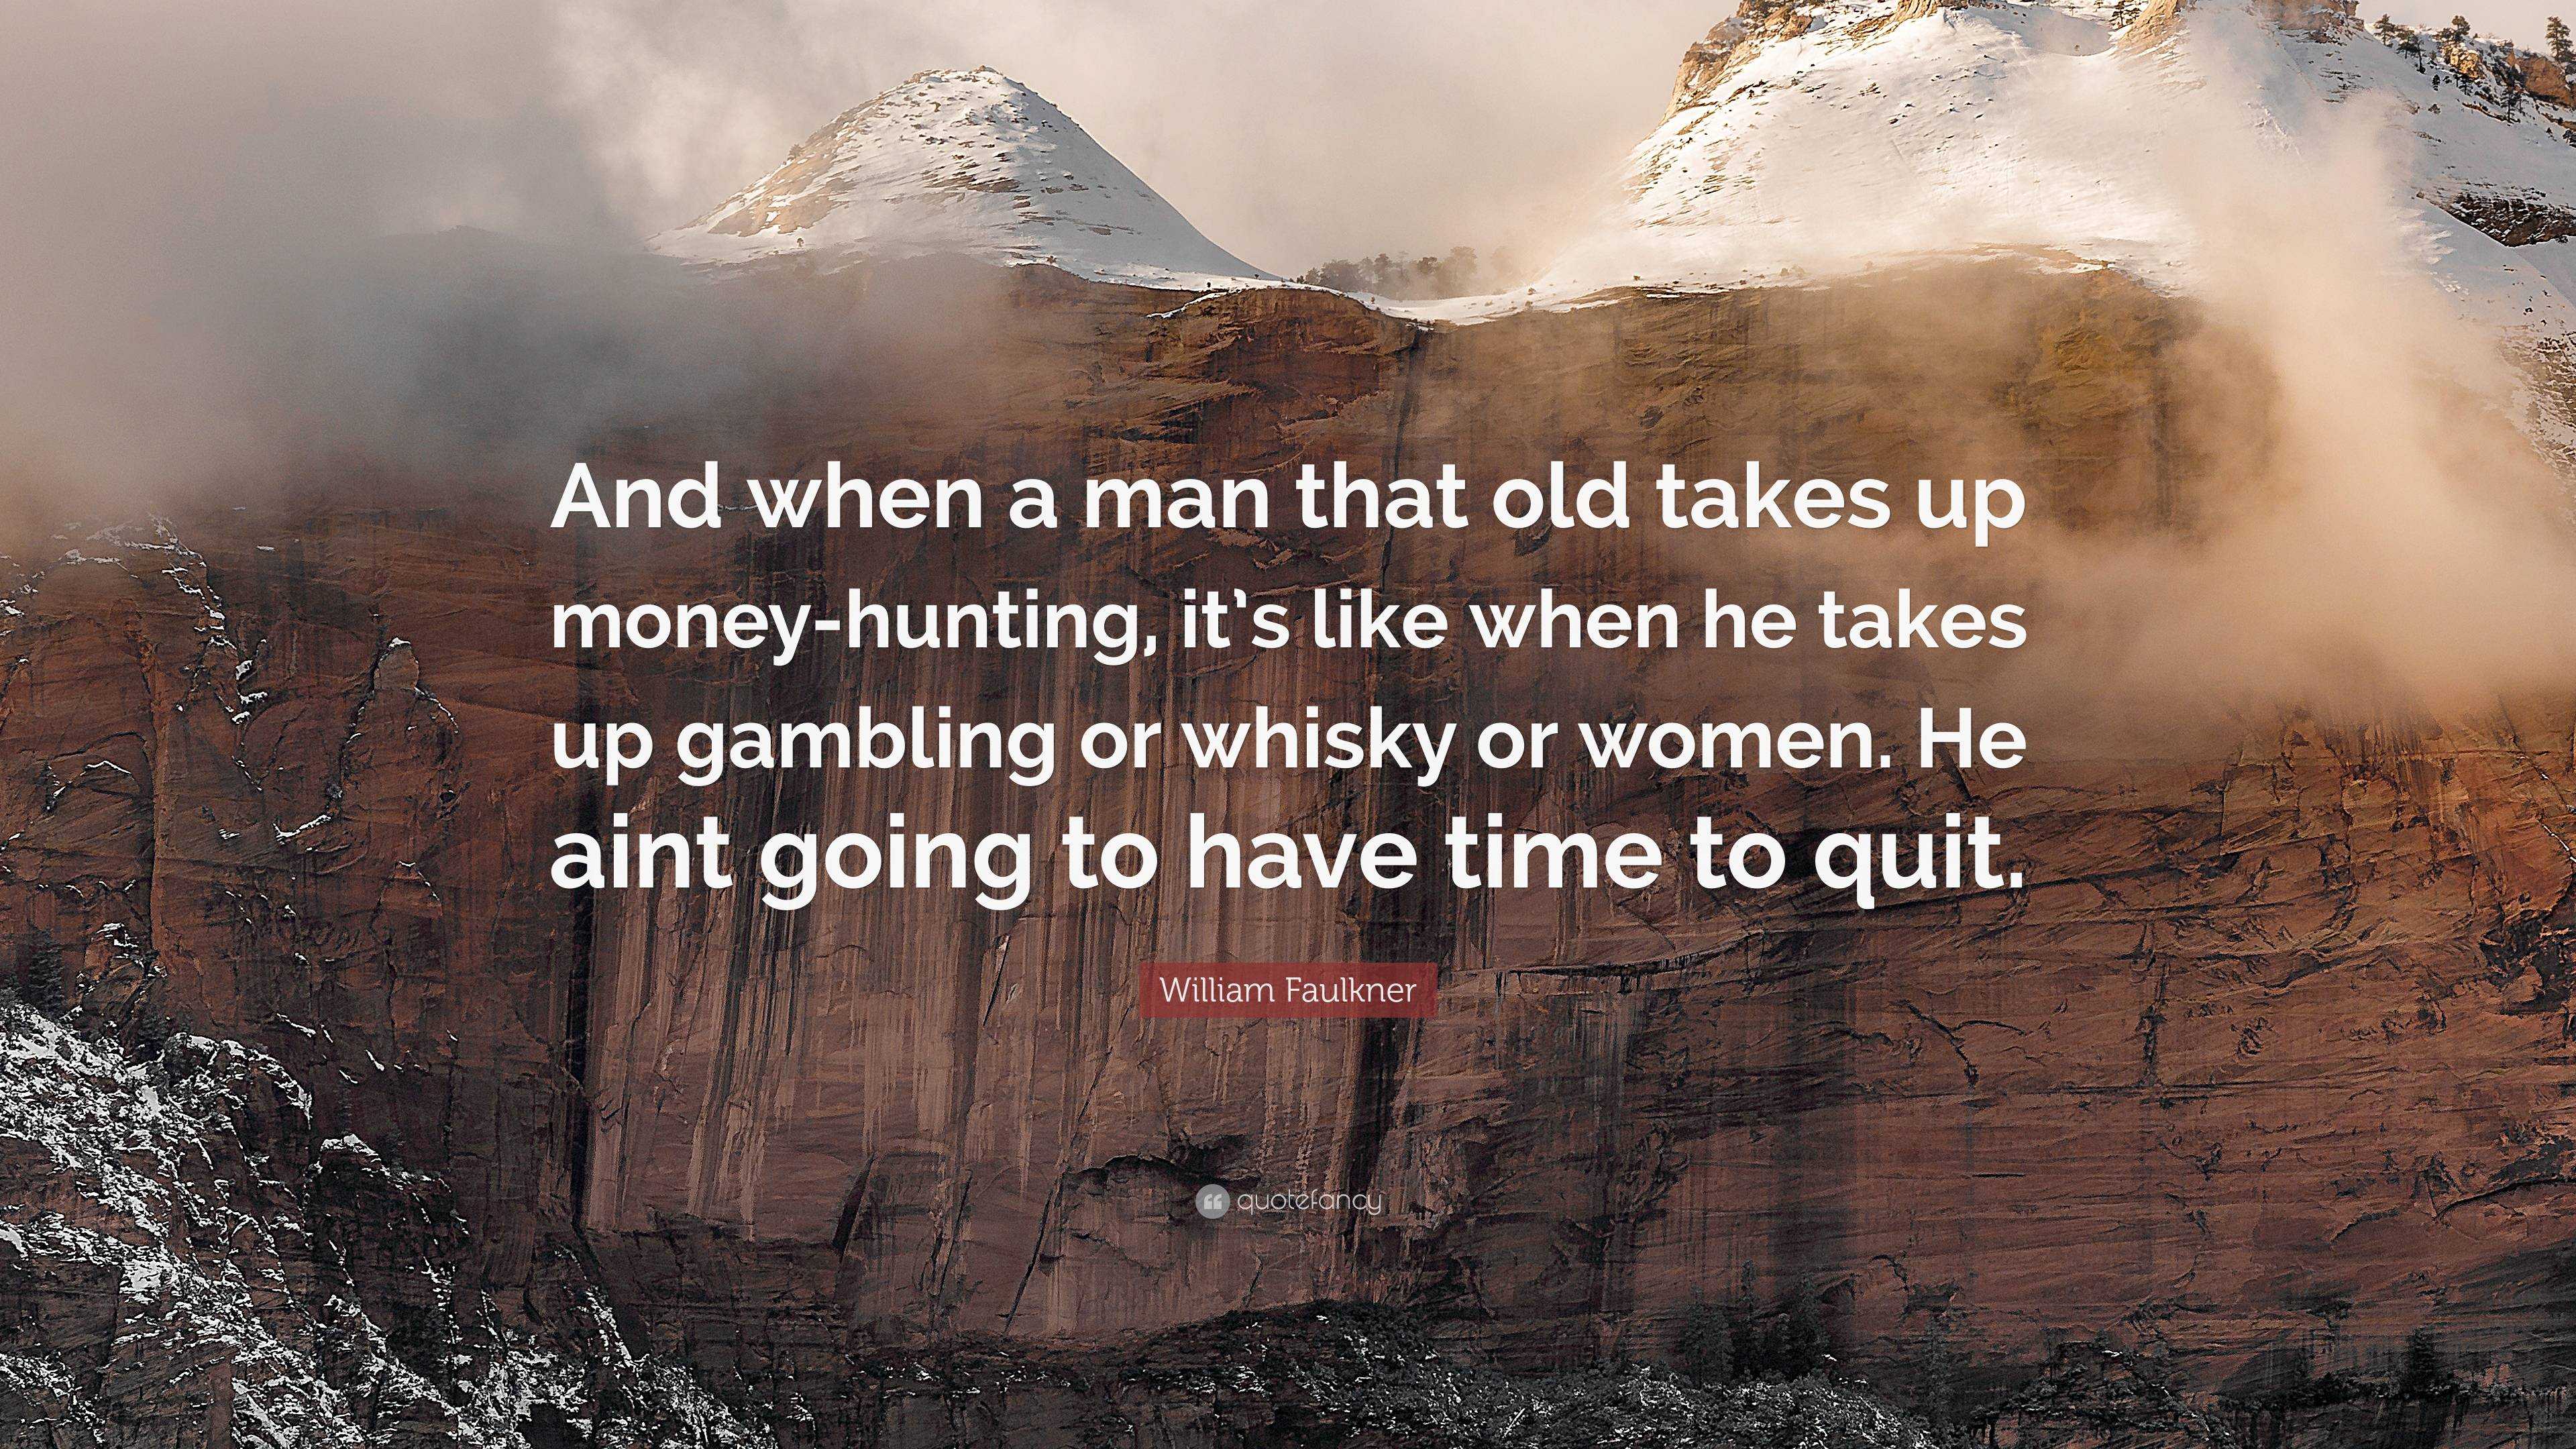 William Faulkner Quote: “And When A Man That Old Takes Up Money-Hunting, It's Like When He Takes Up Gambling Or Whisky Or Women. He Aint Going To...”